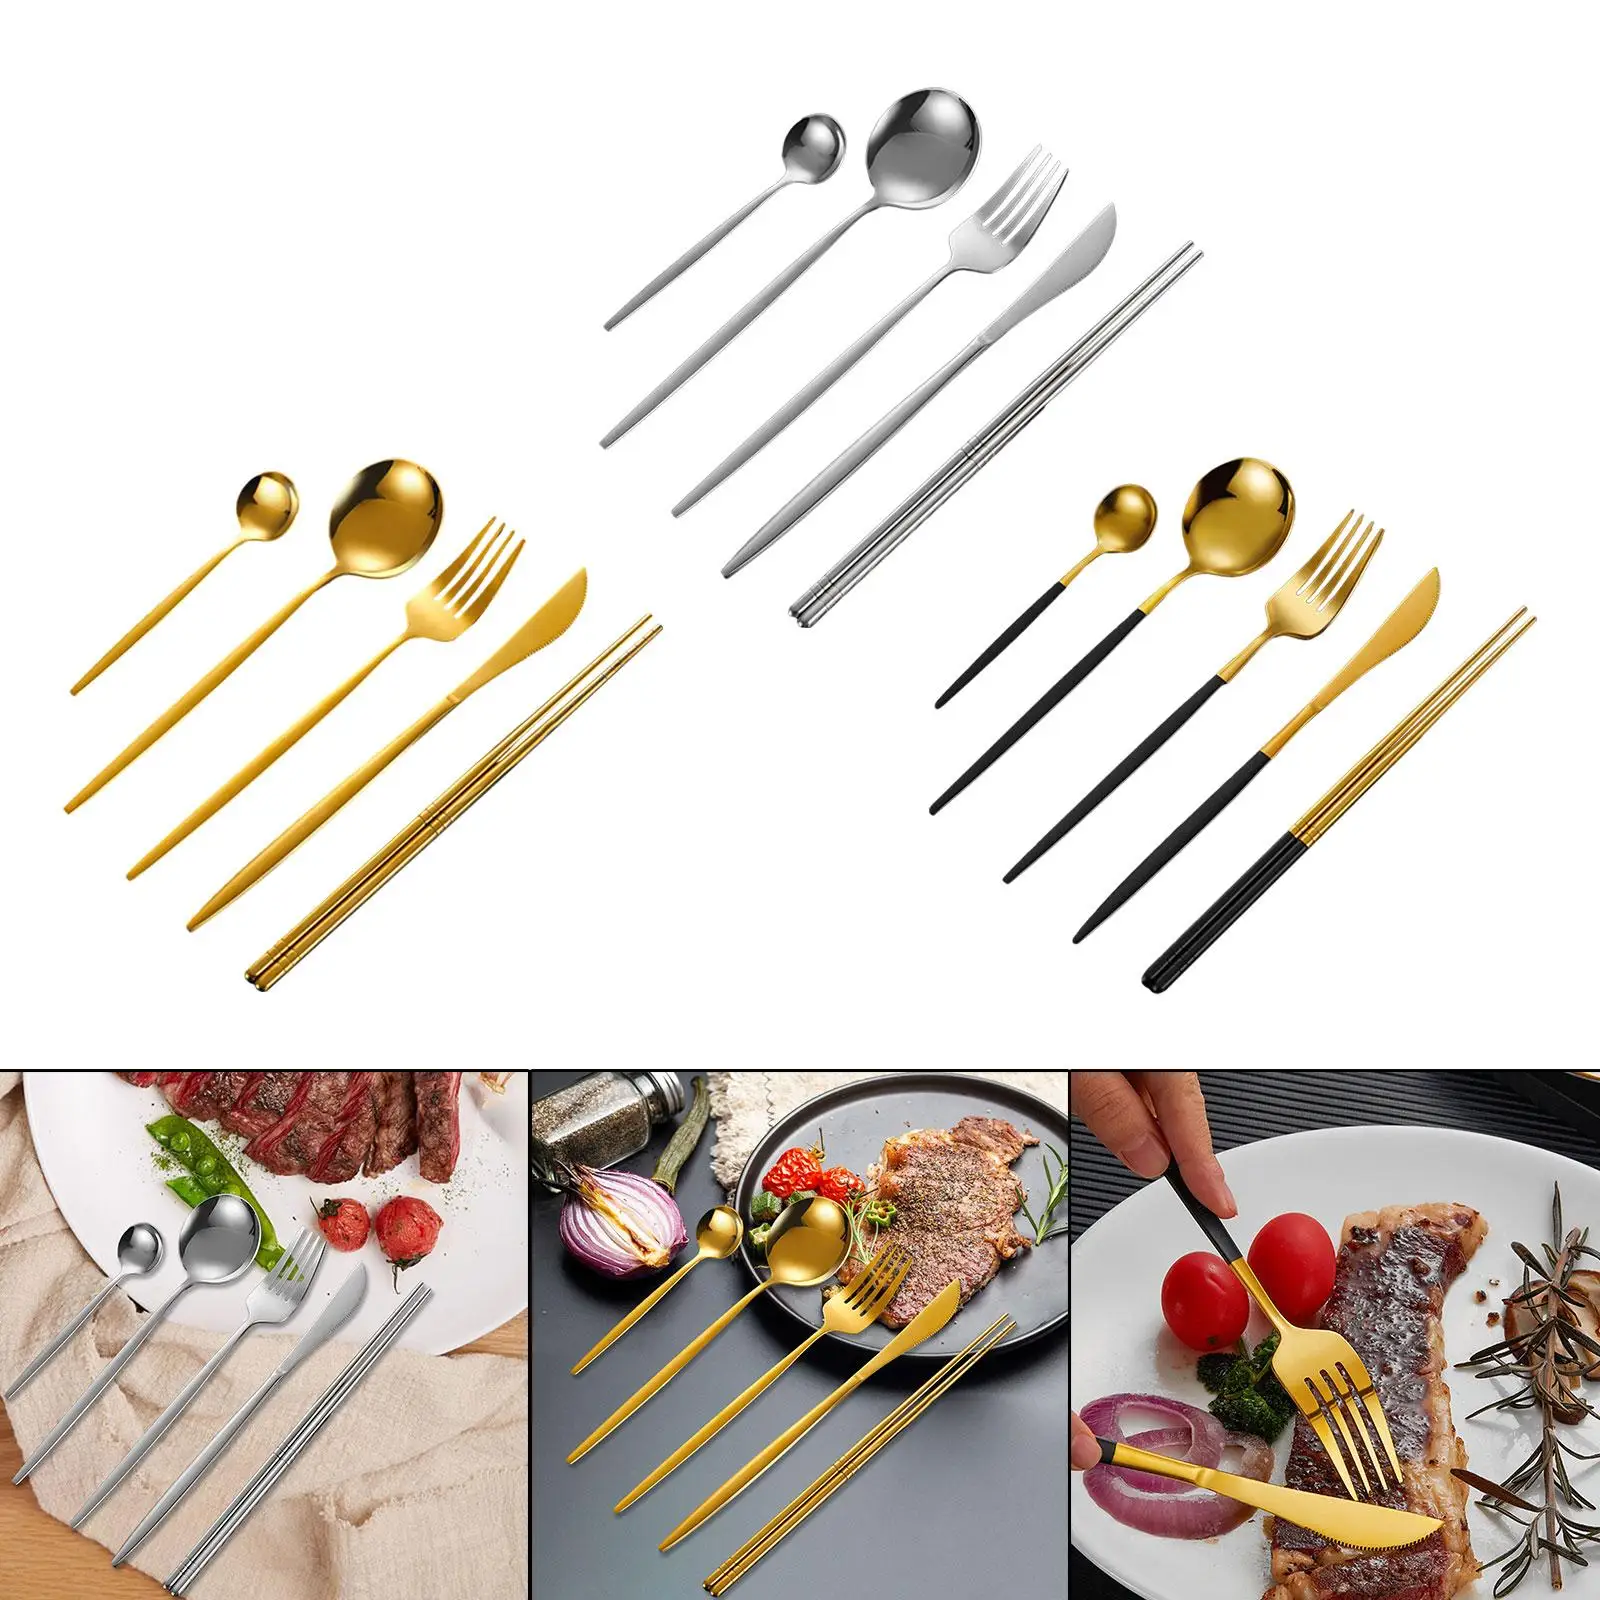 5x Camping Cutlery Set Portable Long Handle Dinnerware Outdoor Tableware Chopsticks Spoon Set for Hiking Picnic BBQ Office Home